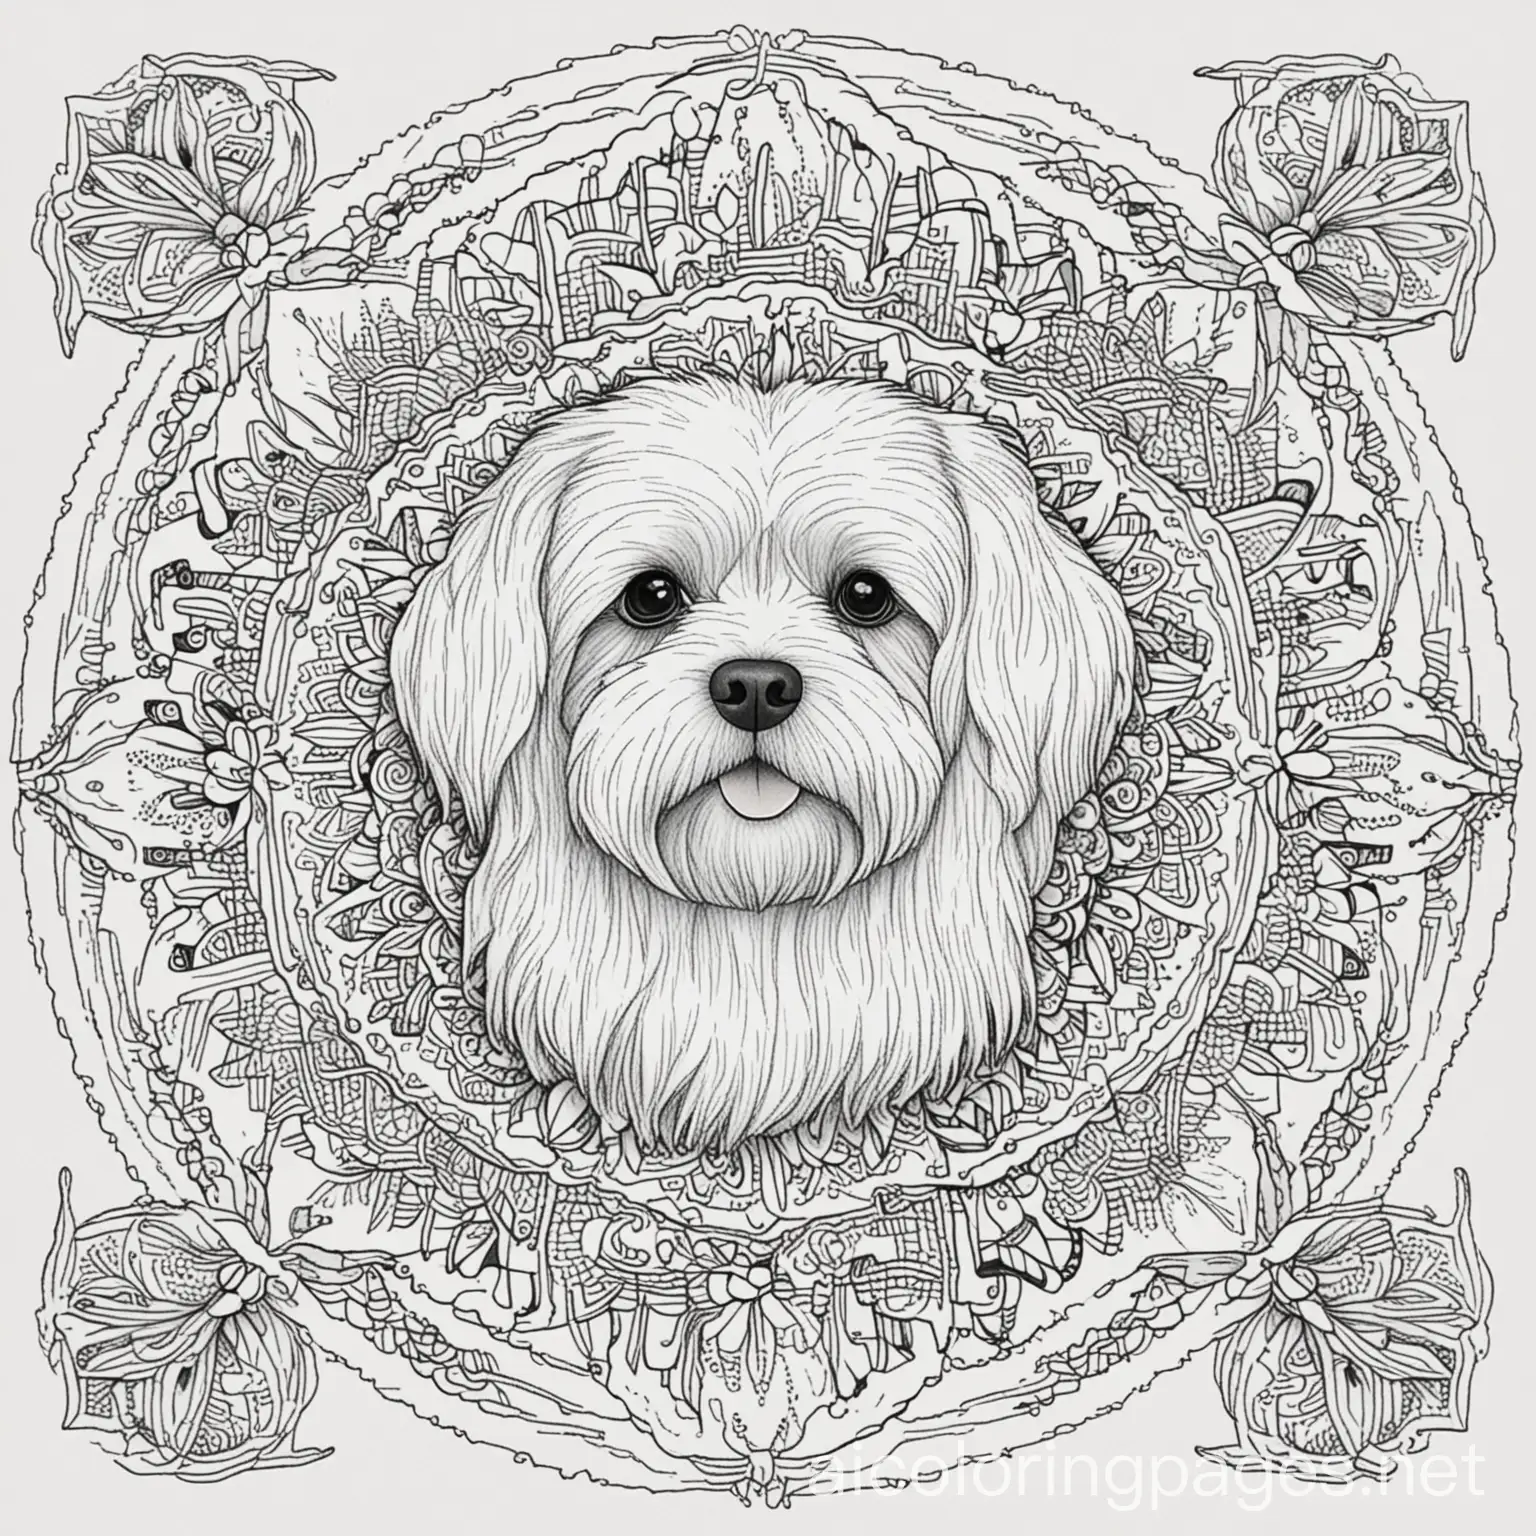 Havanese-Mandala-Coloring-Page-Relaxing-DogThemed-Line-Art-for-Kids